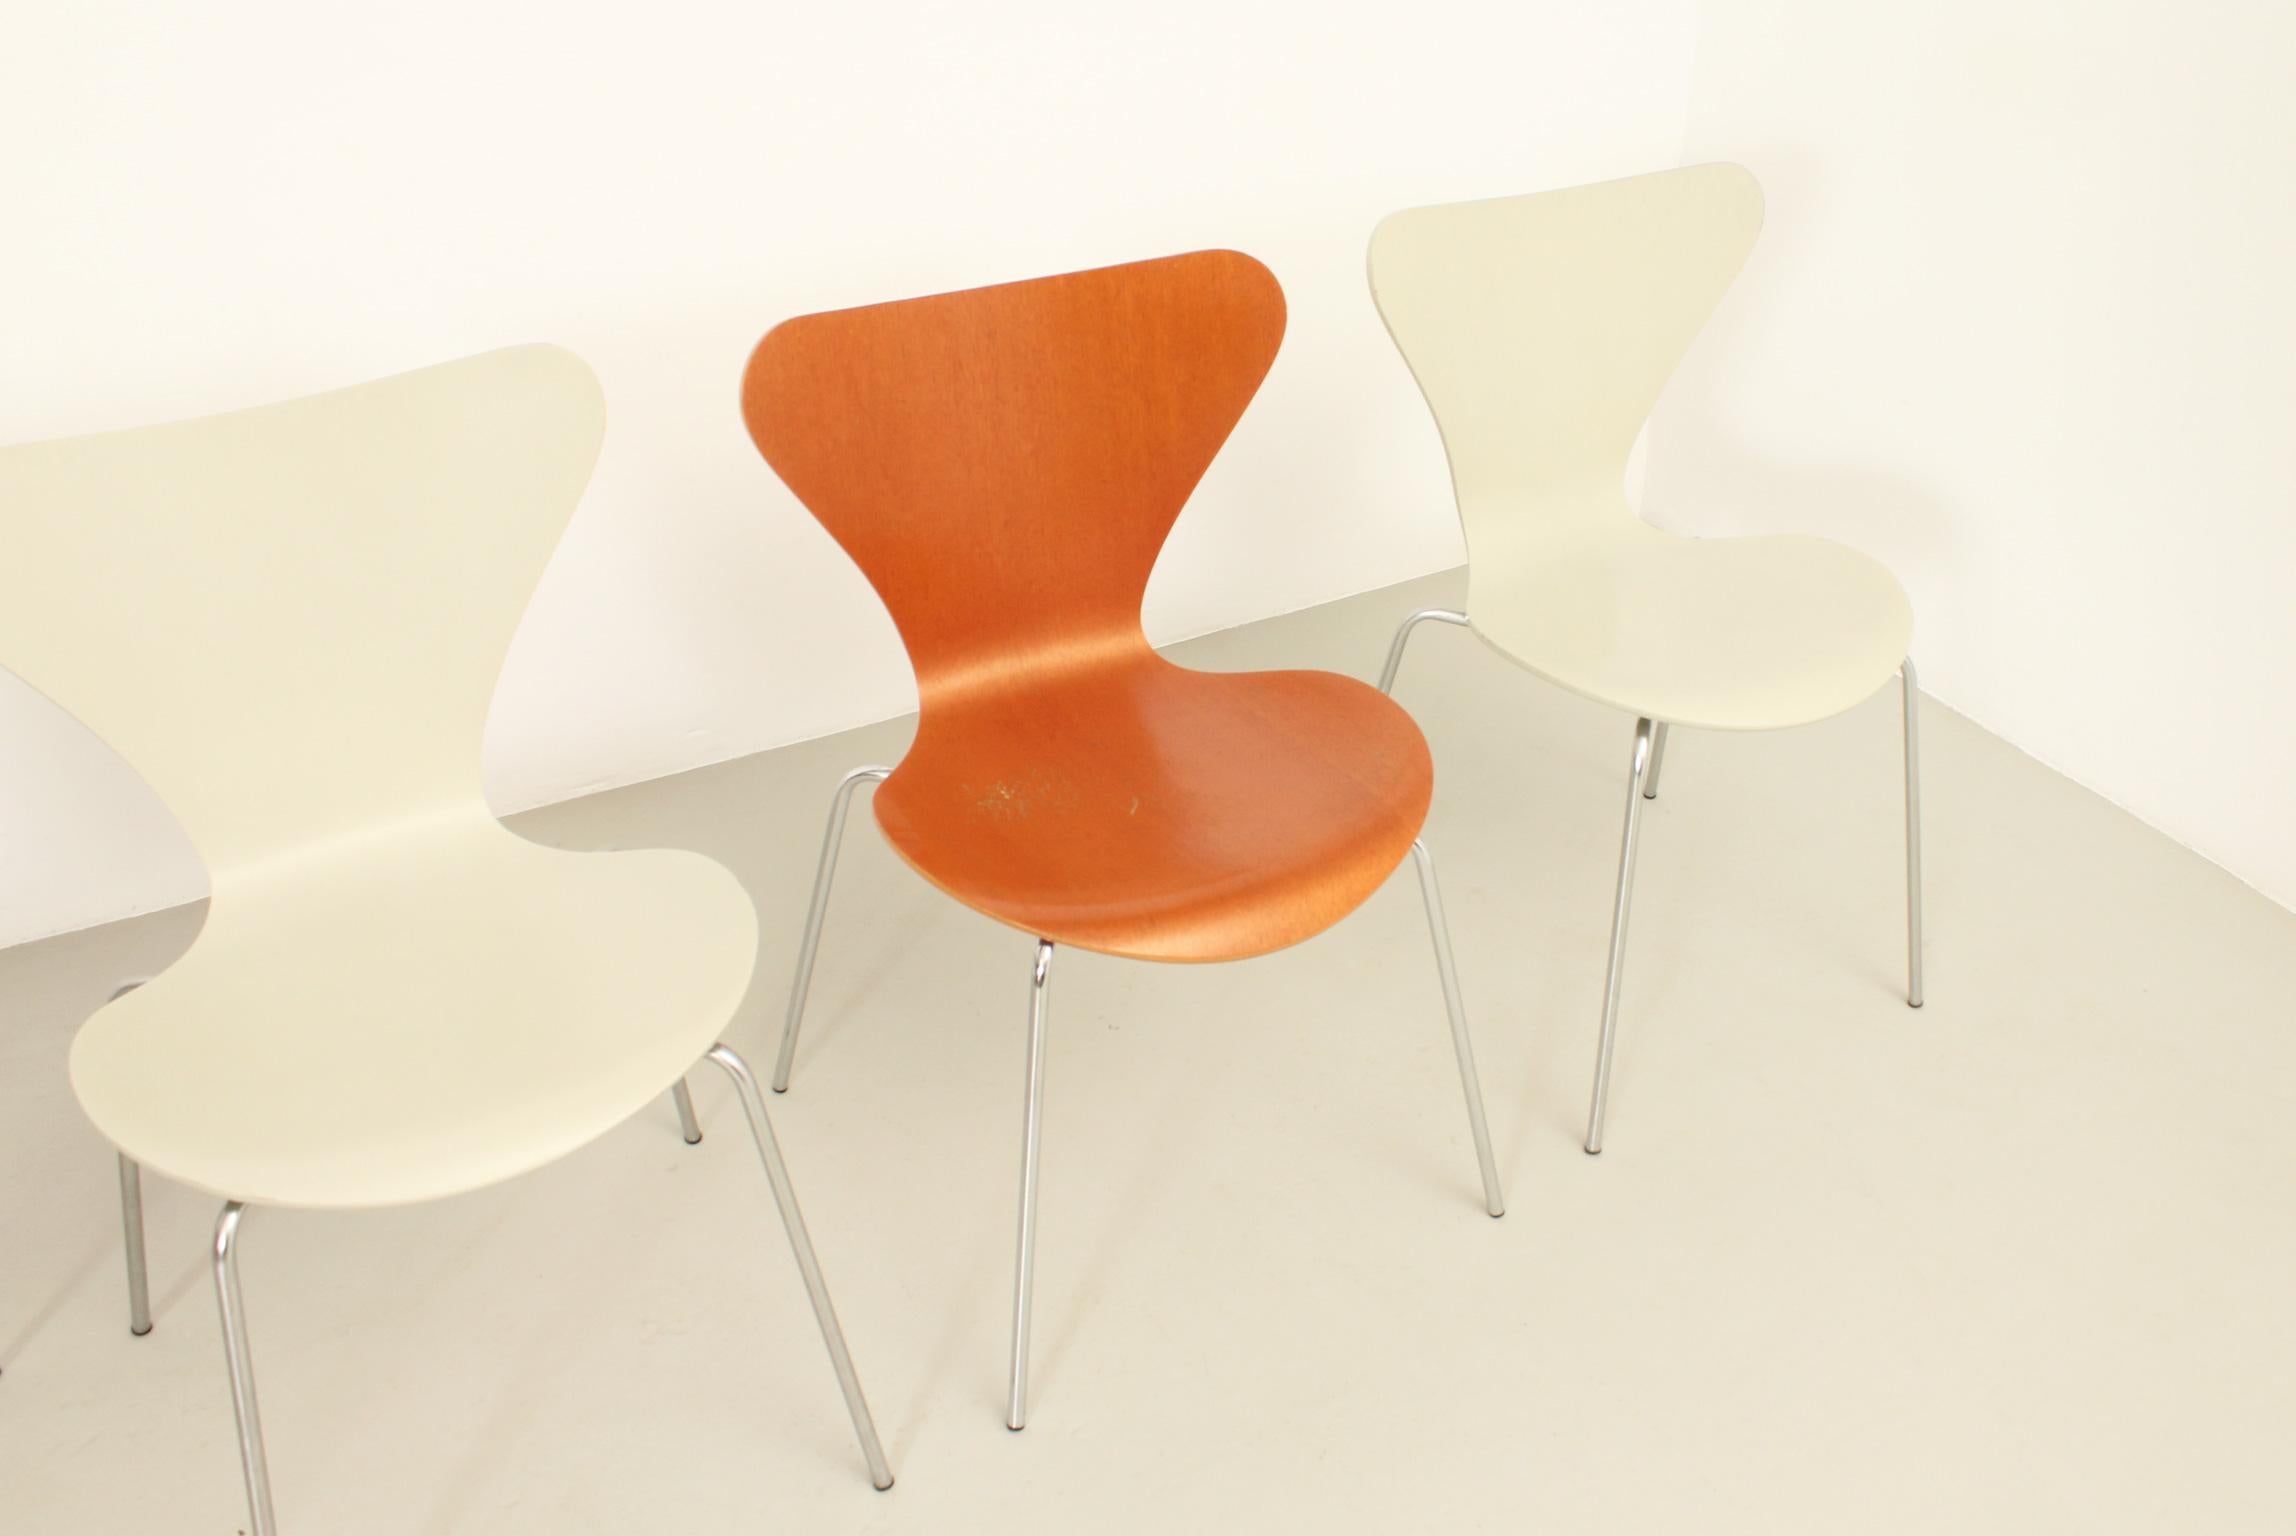 Metal Set of Five 3107 Chairs by Arne Jacobsen for Fritz Hansen